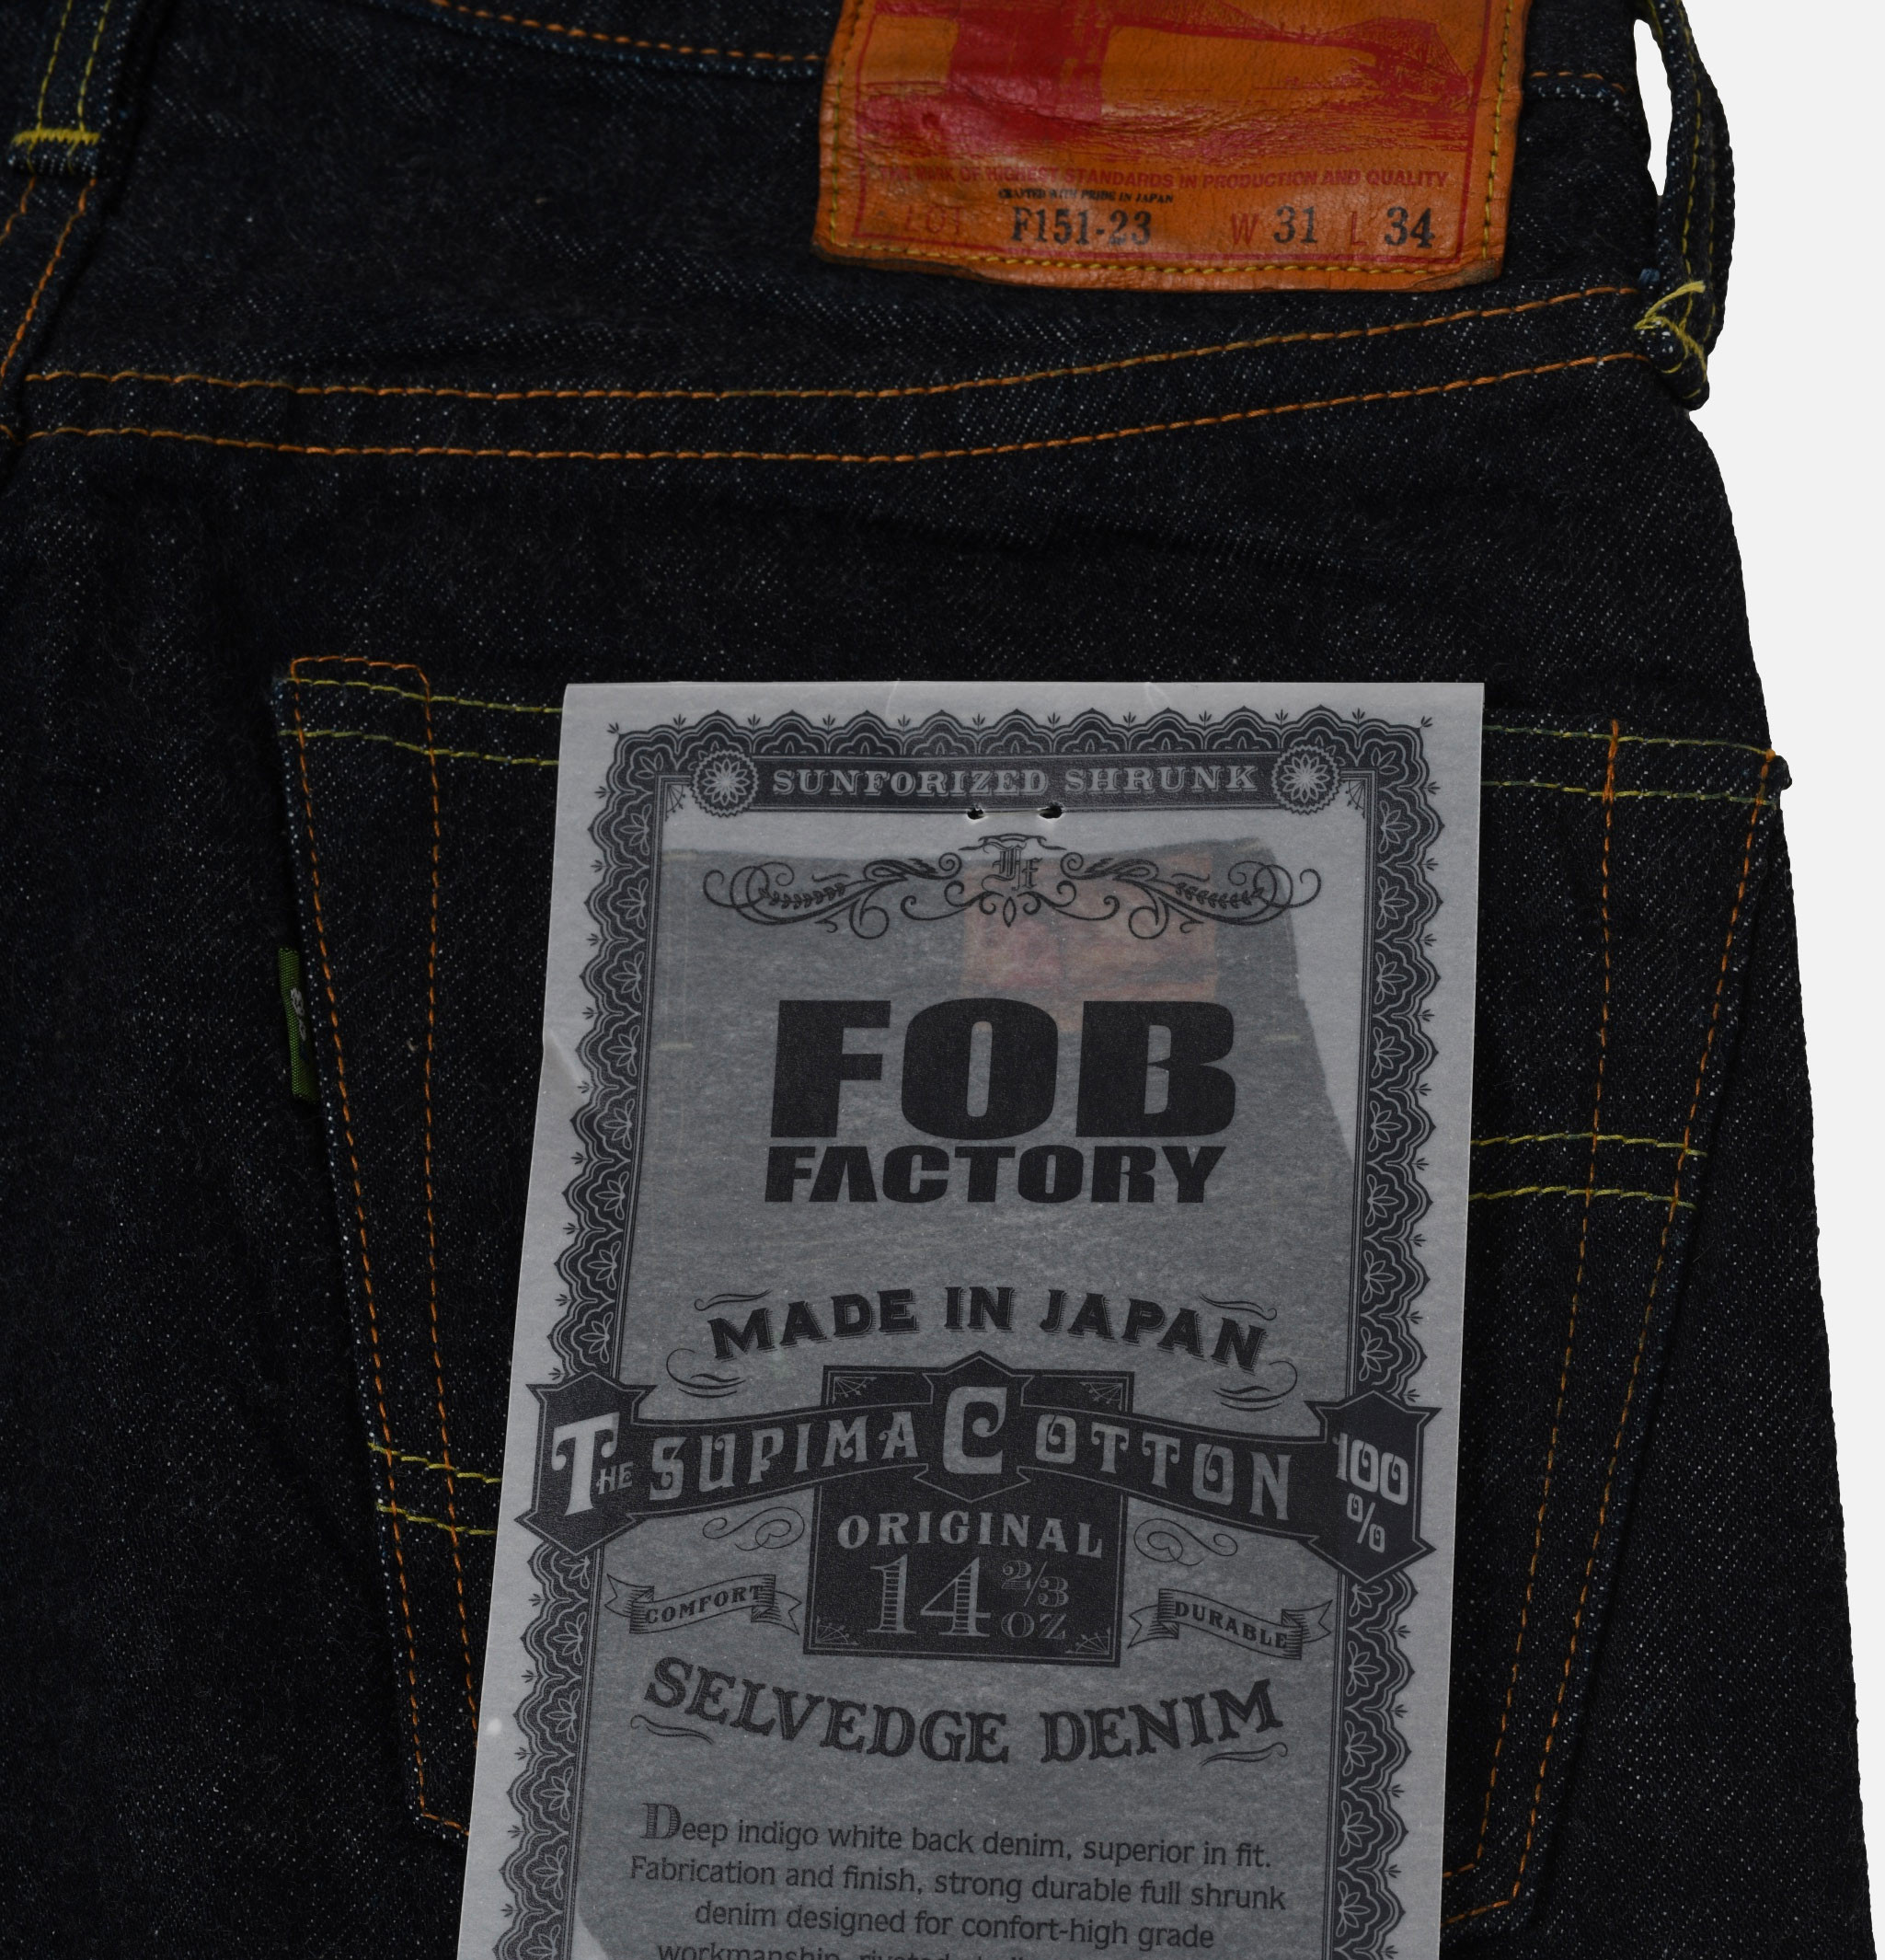 FOB Factory Jeans F151 One Wash